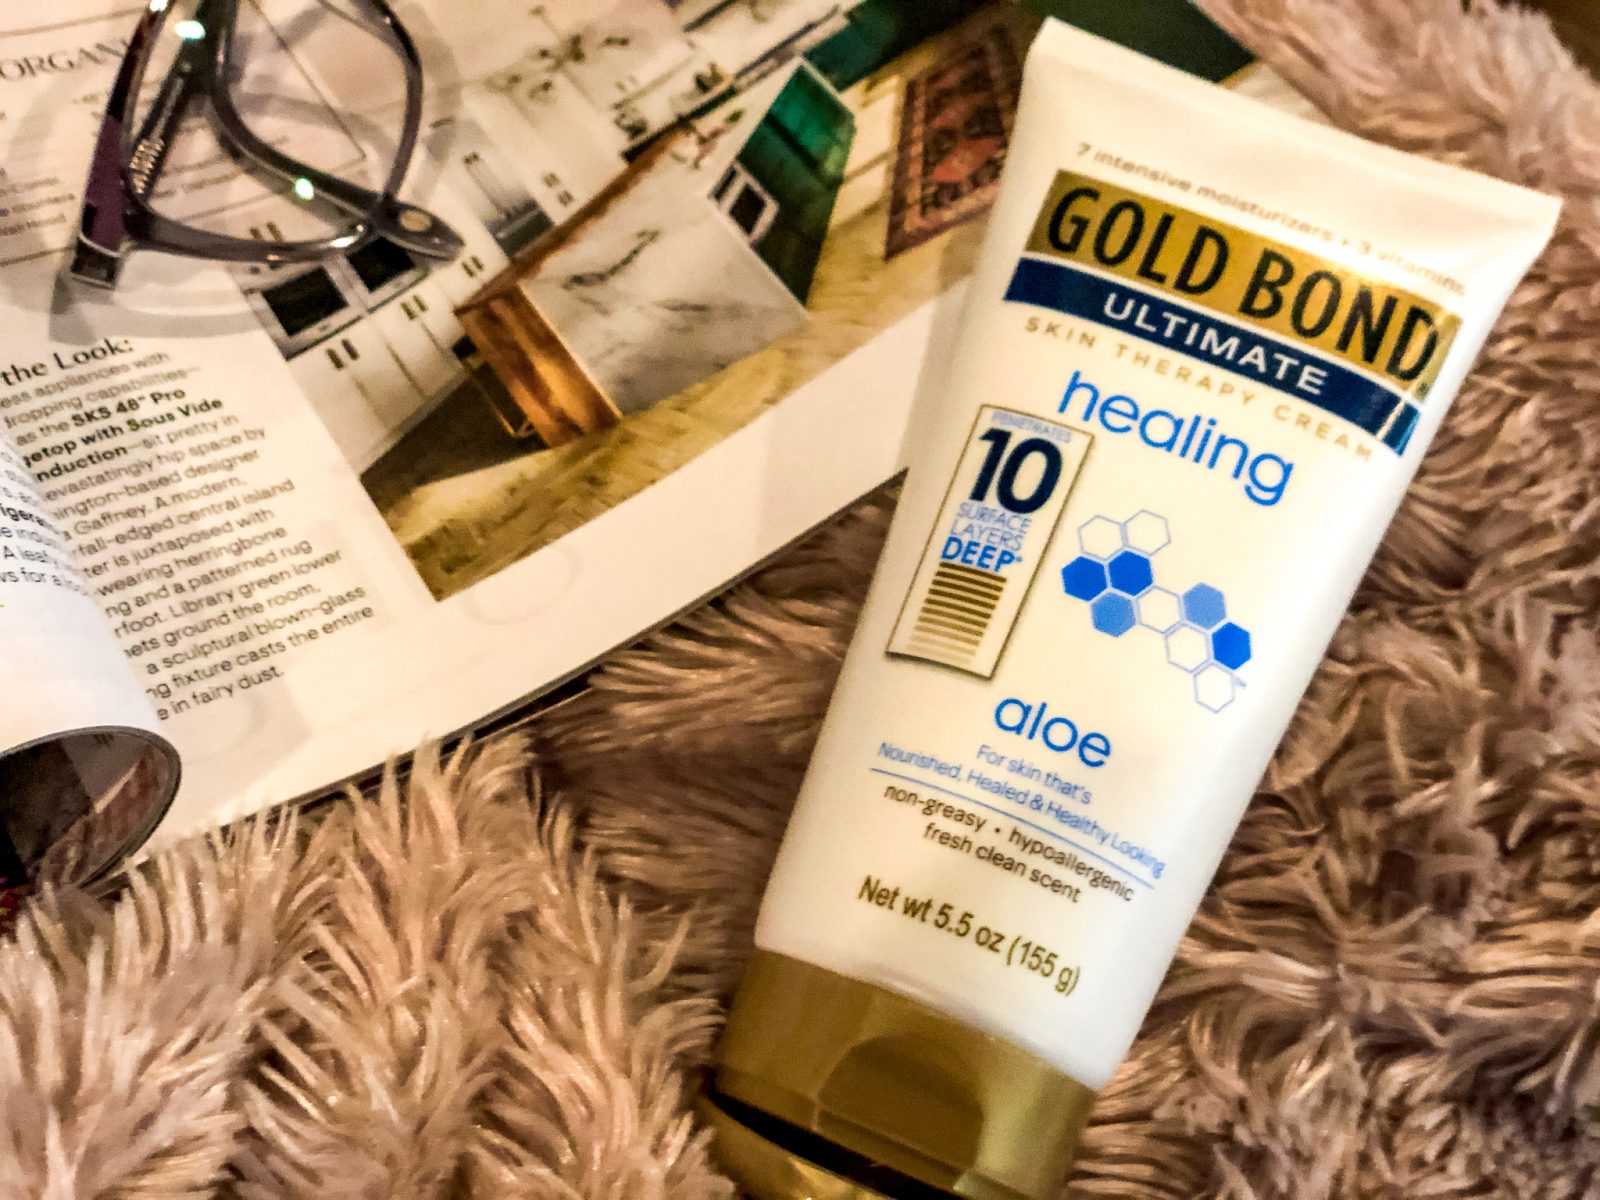 Nice Discount On Gold Bond Lotion - Save Up To $5 At Publix